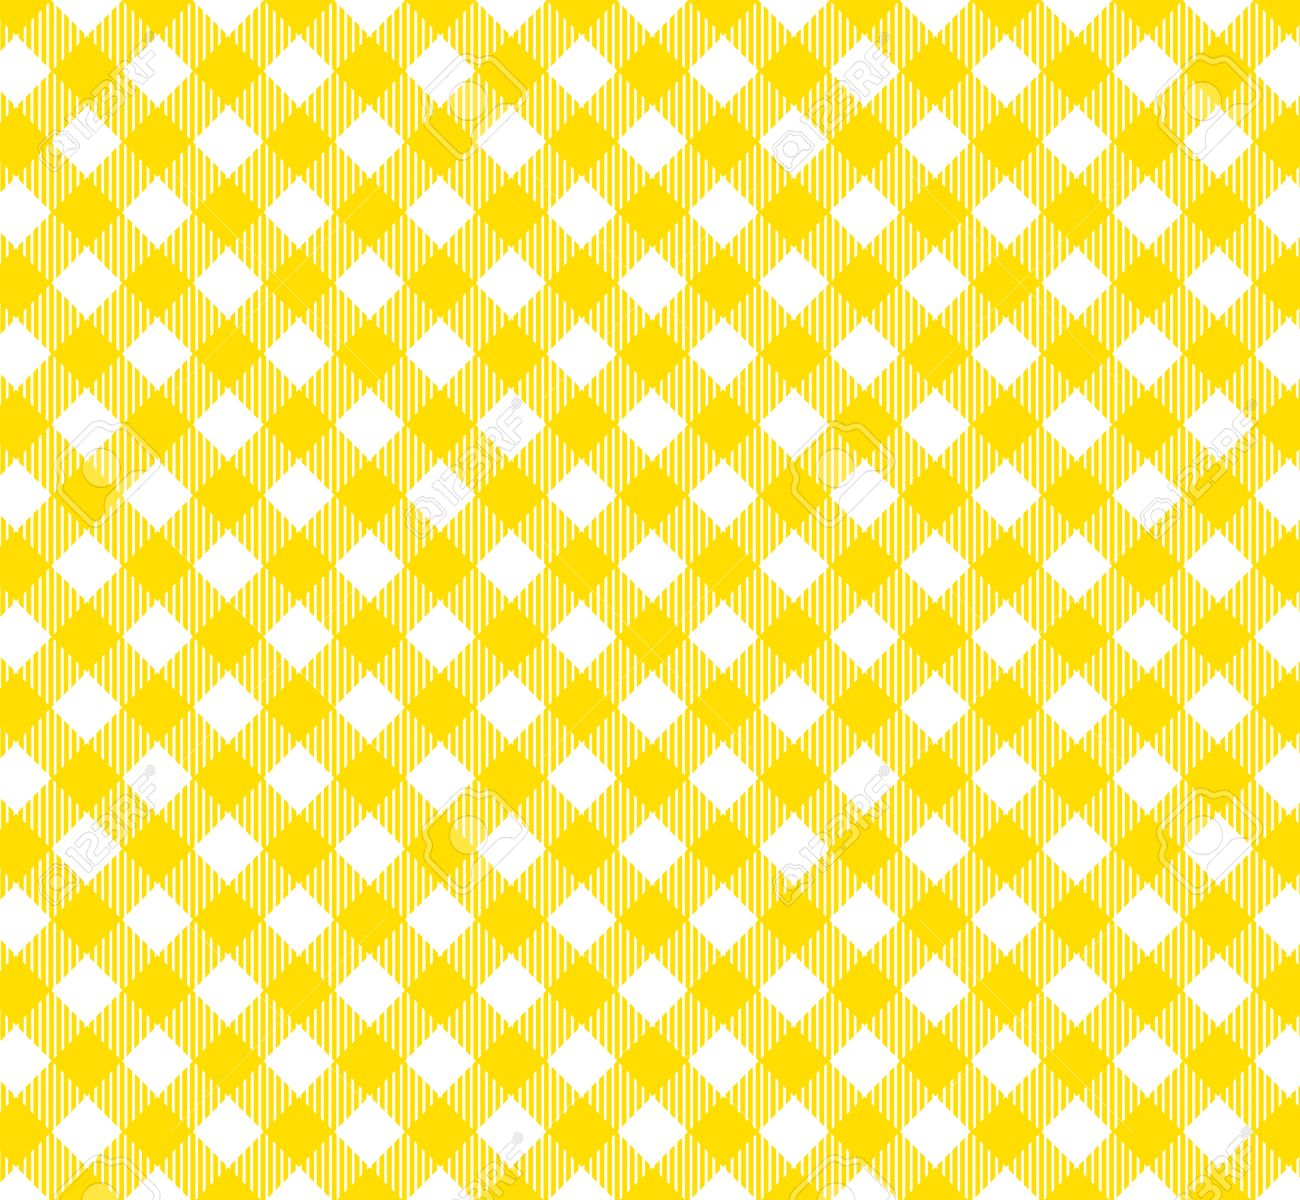 Images of Yellow Stripes | 1300x1200